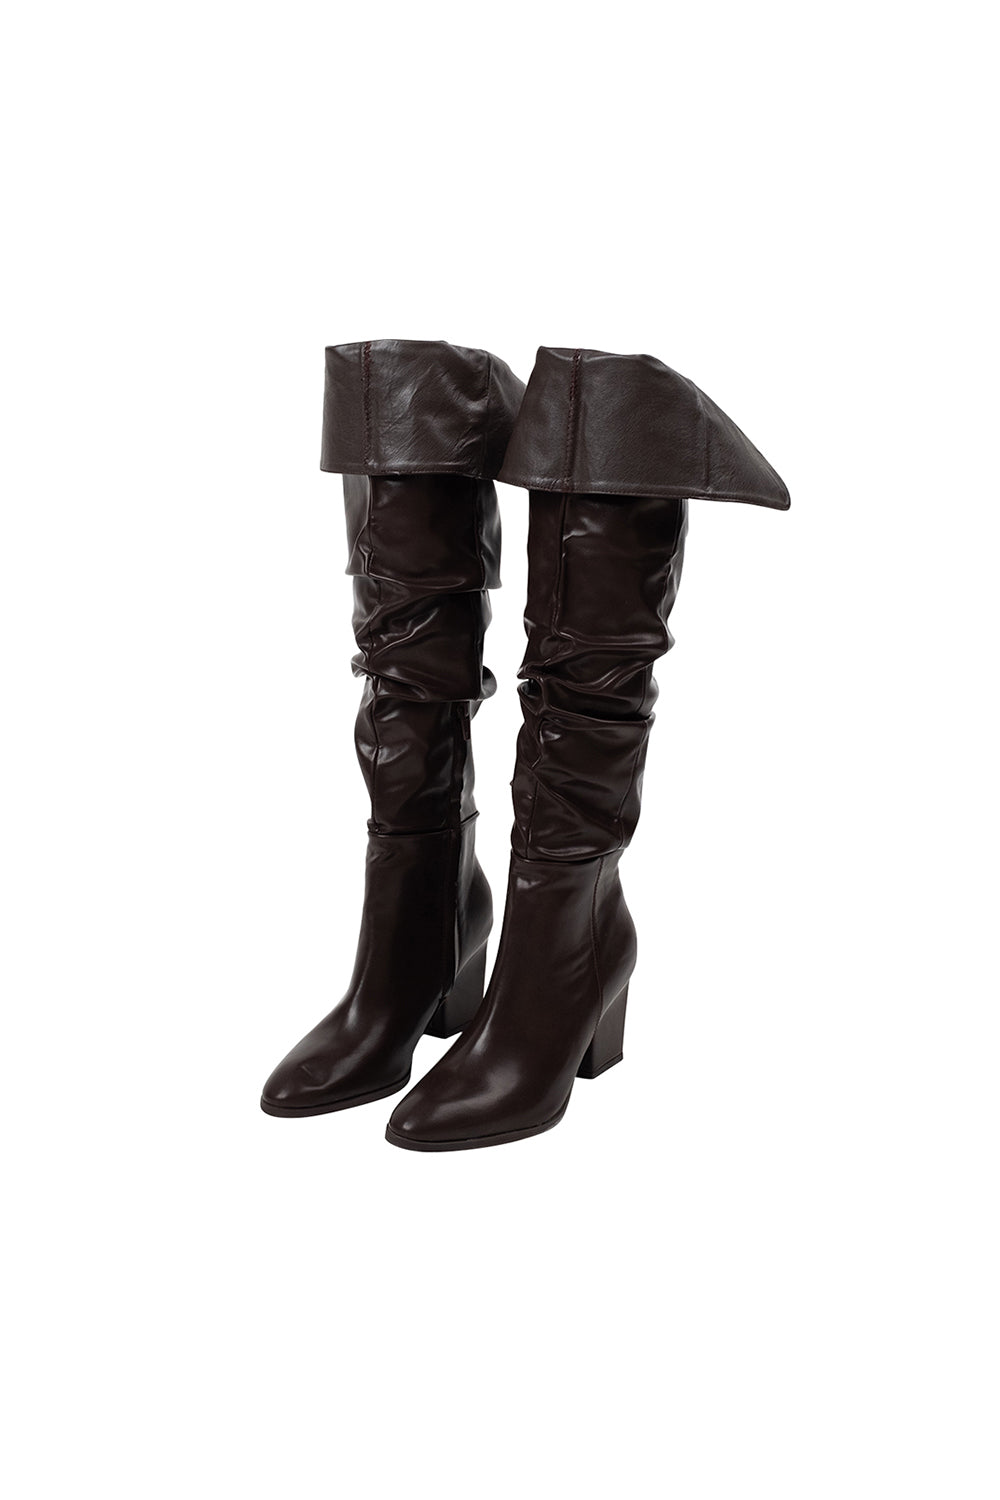 wrinkle knee high long boots